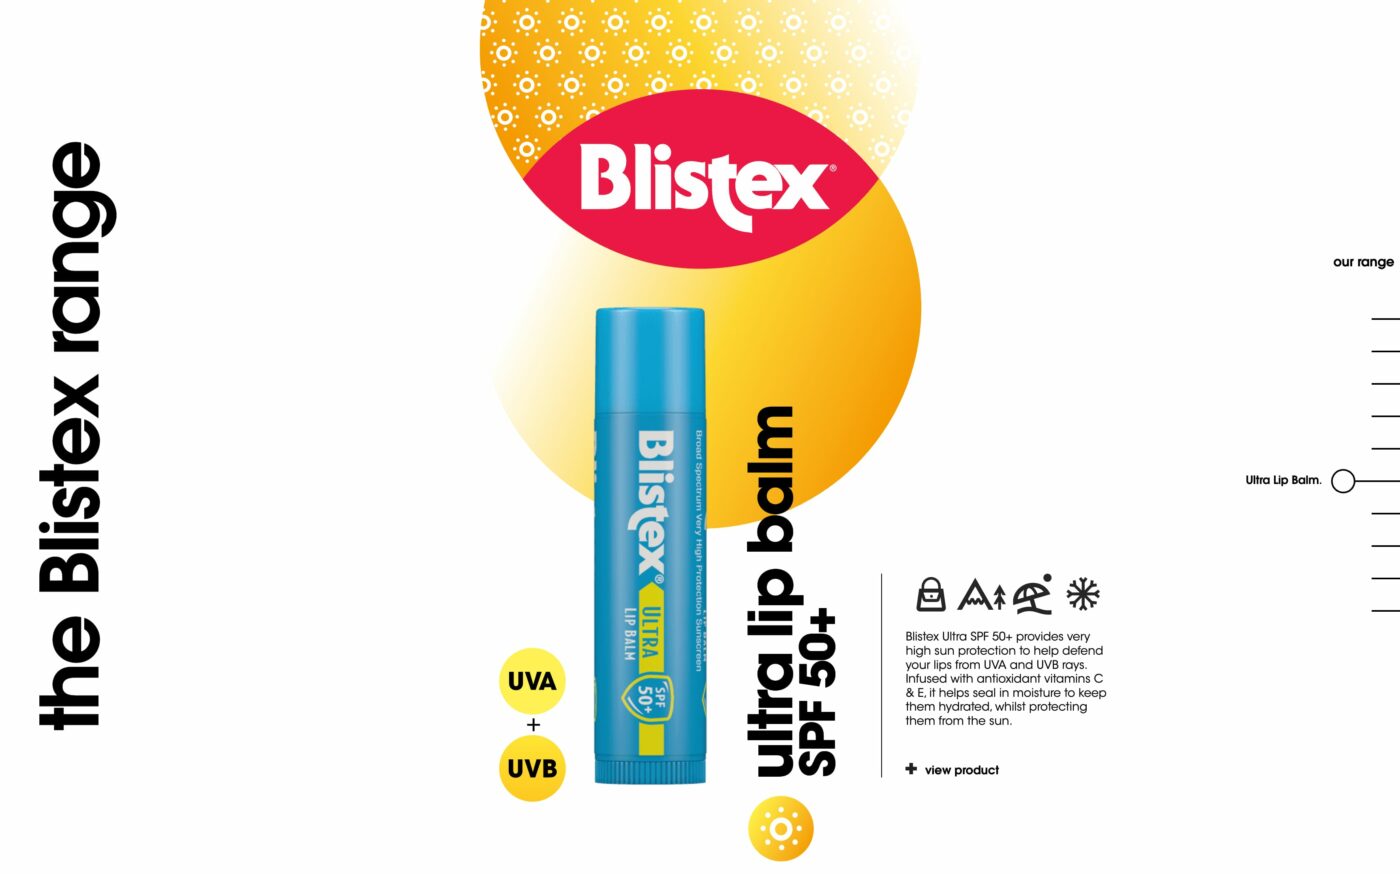 Rich Brown - Blistex Page Image